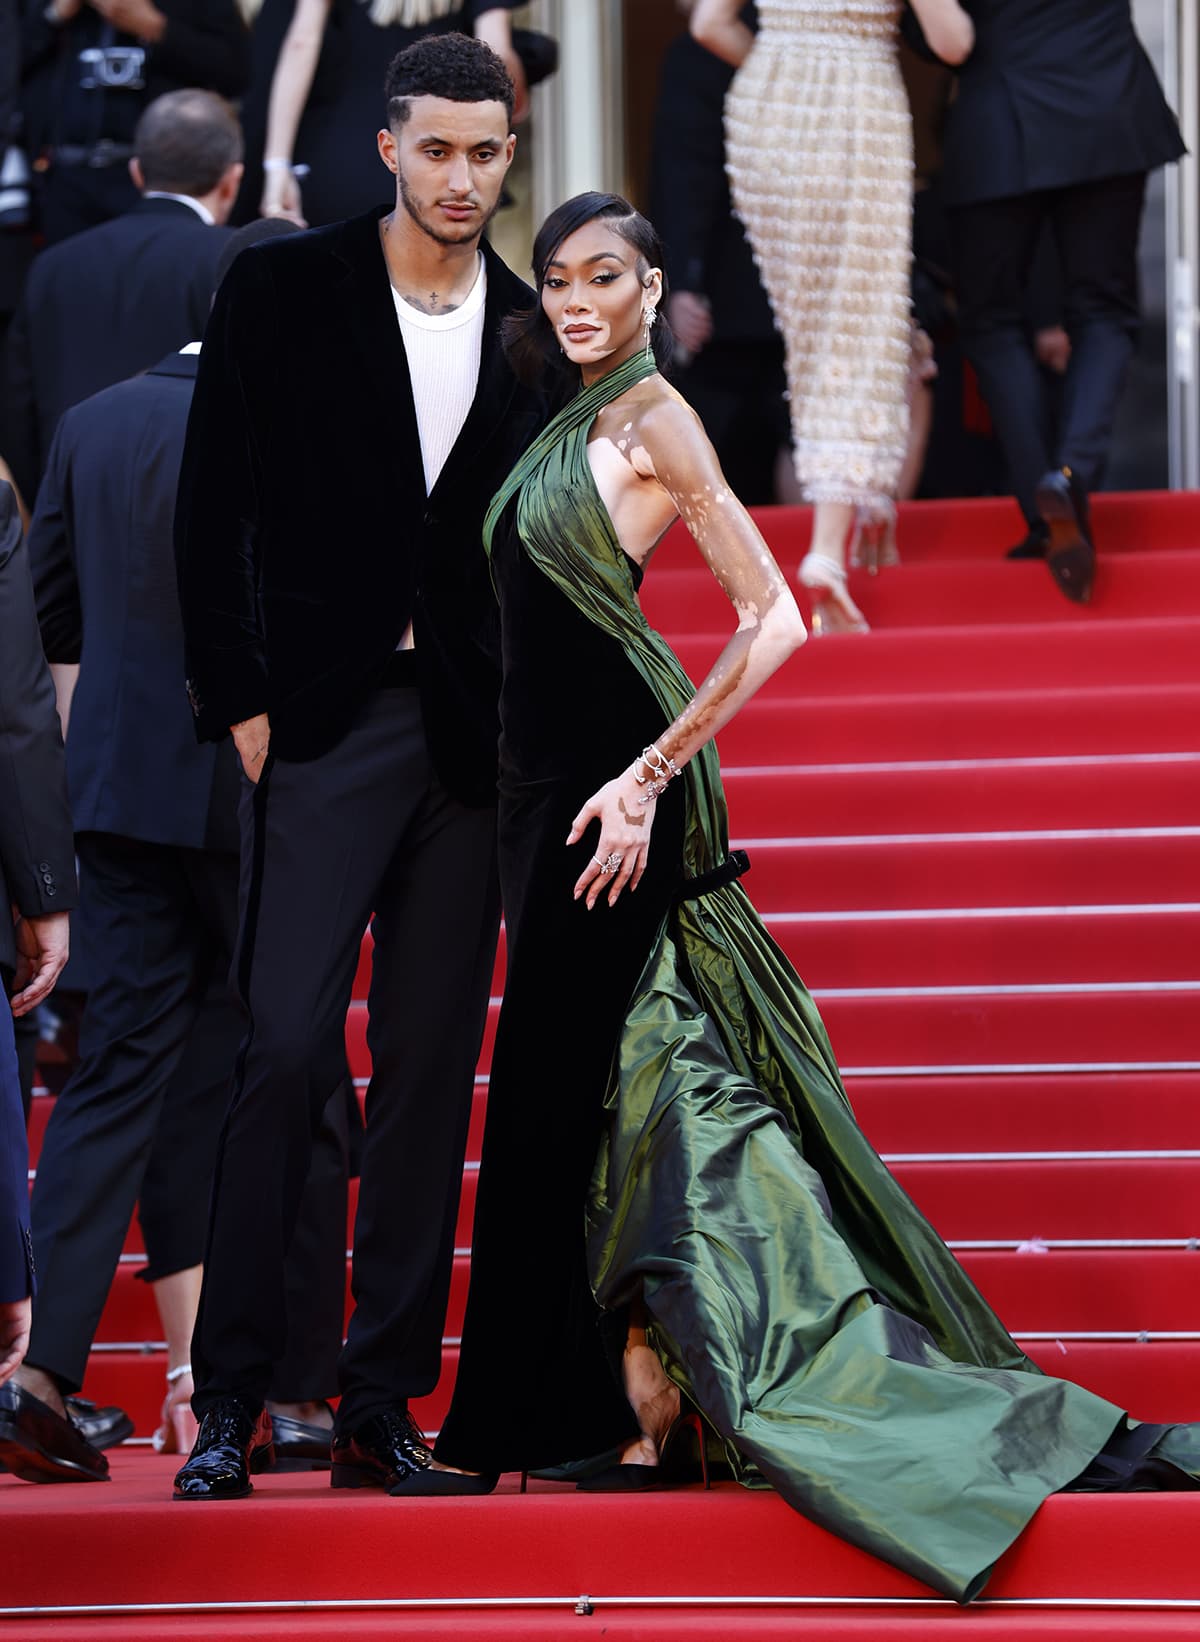 Kyle Kuzma and Winnie Harlow at the La Passion De Dodin Bouffant premiere during the 76th Cannes Film Festival on May 23, 2023